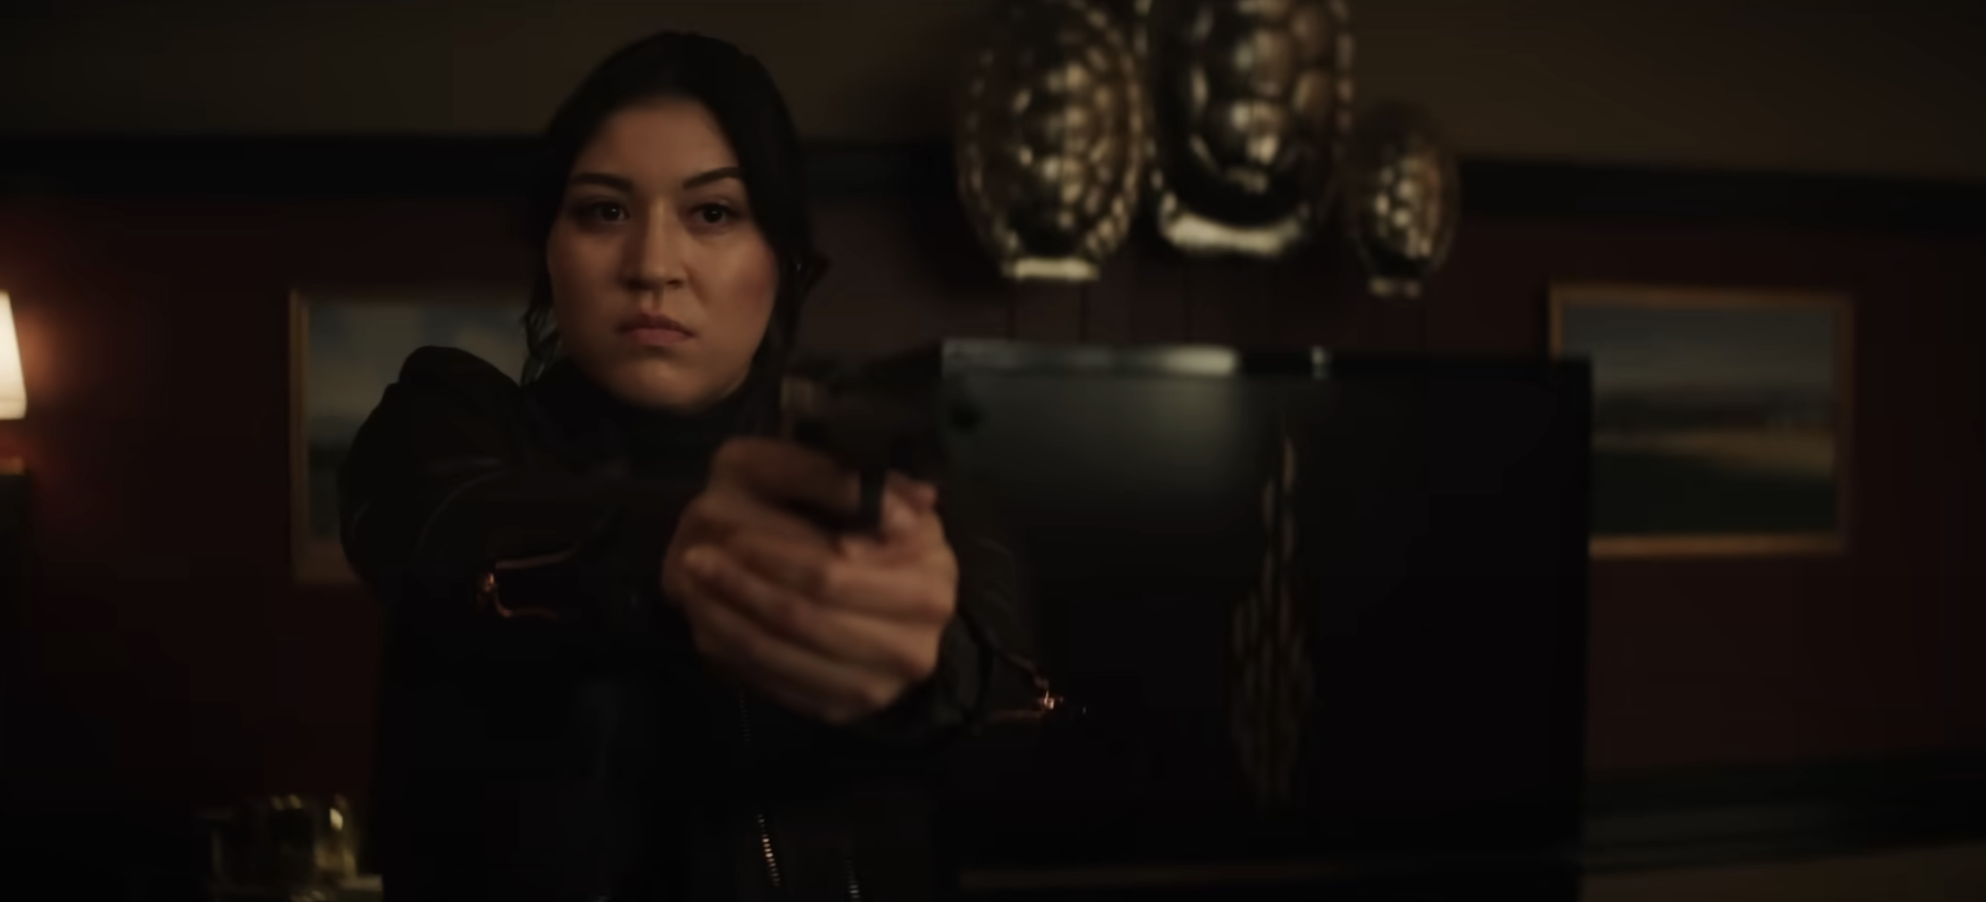 Maya aiming a gun with focus and determination in a dimly lit room